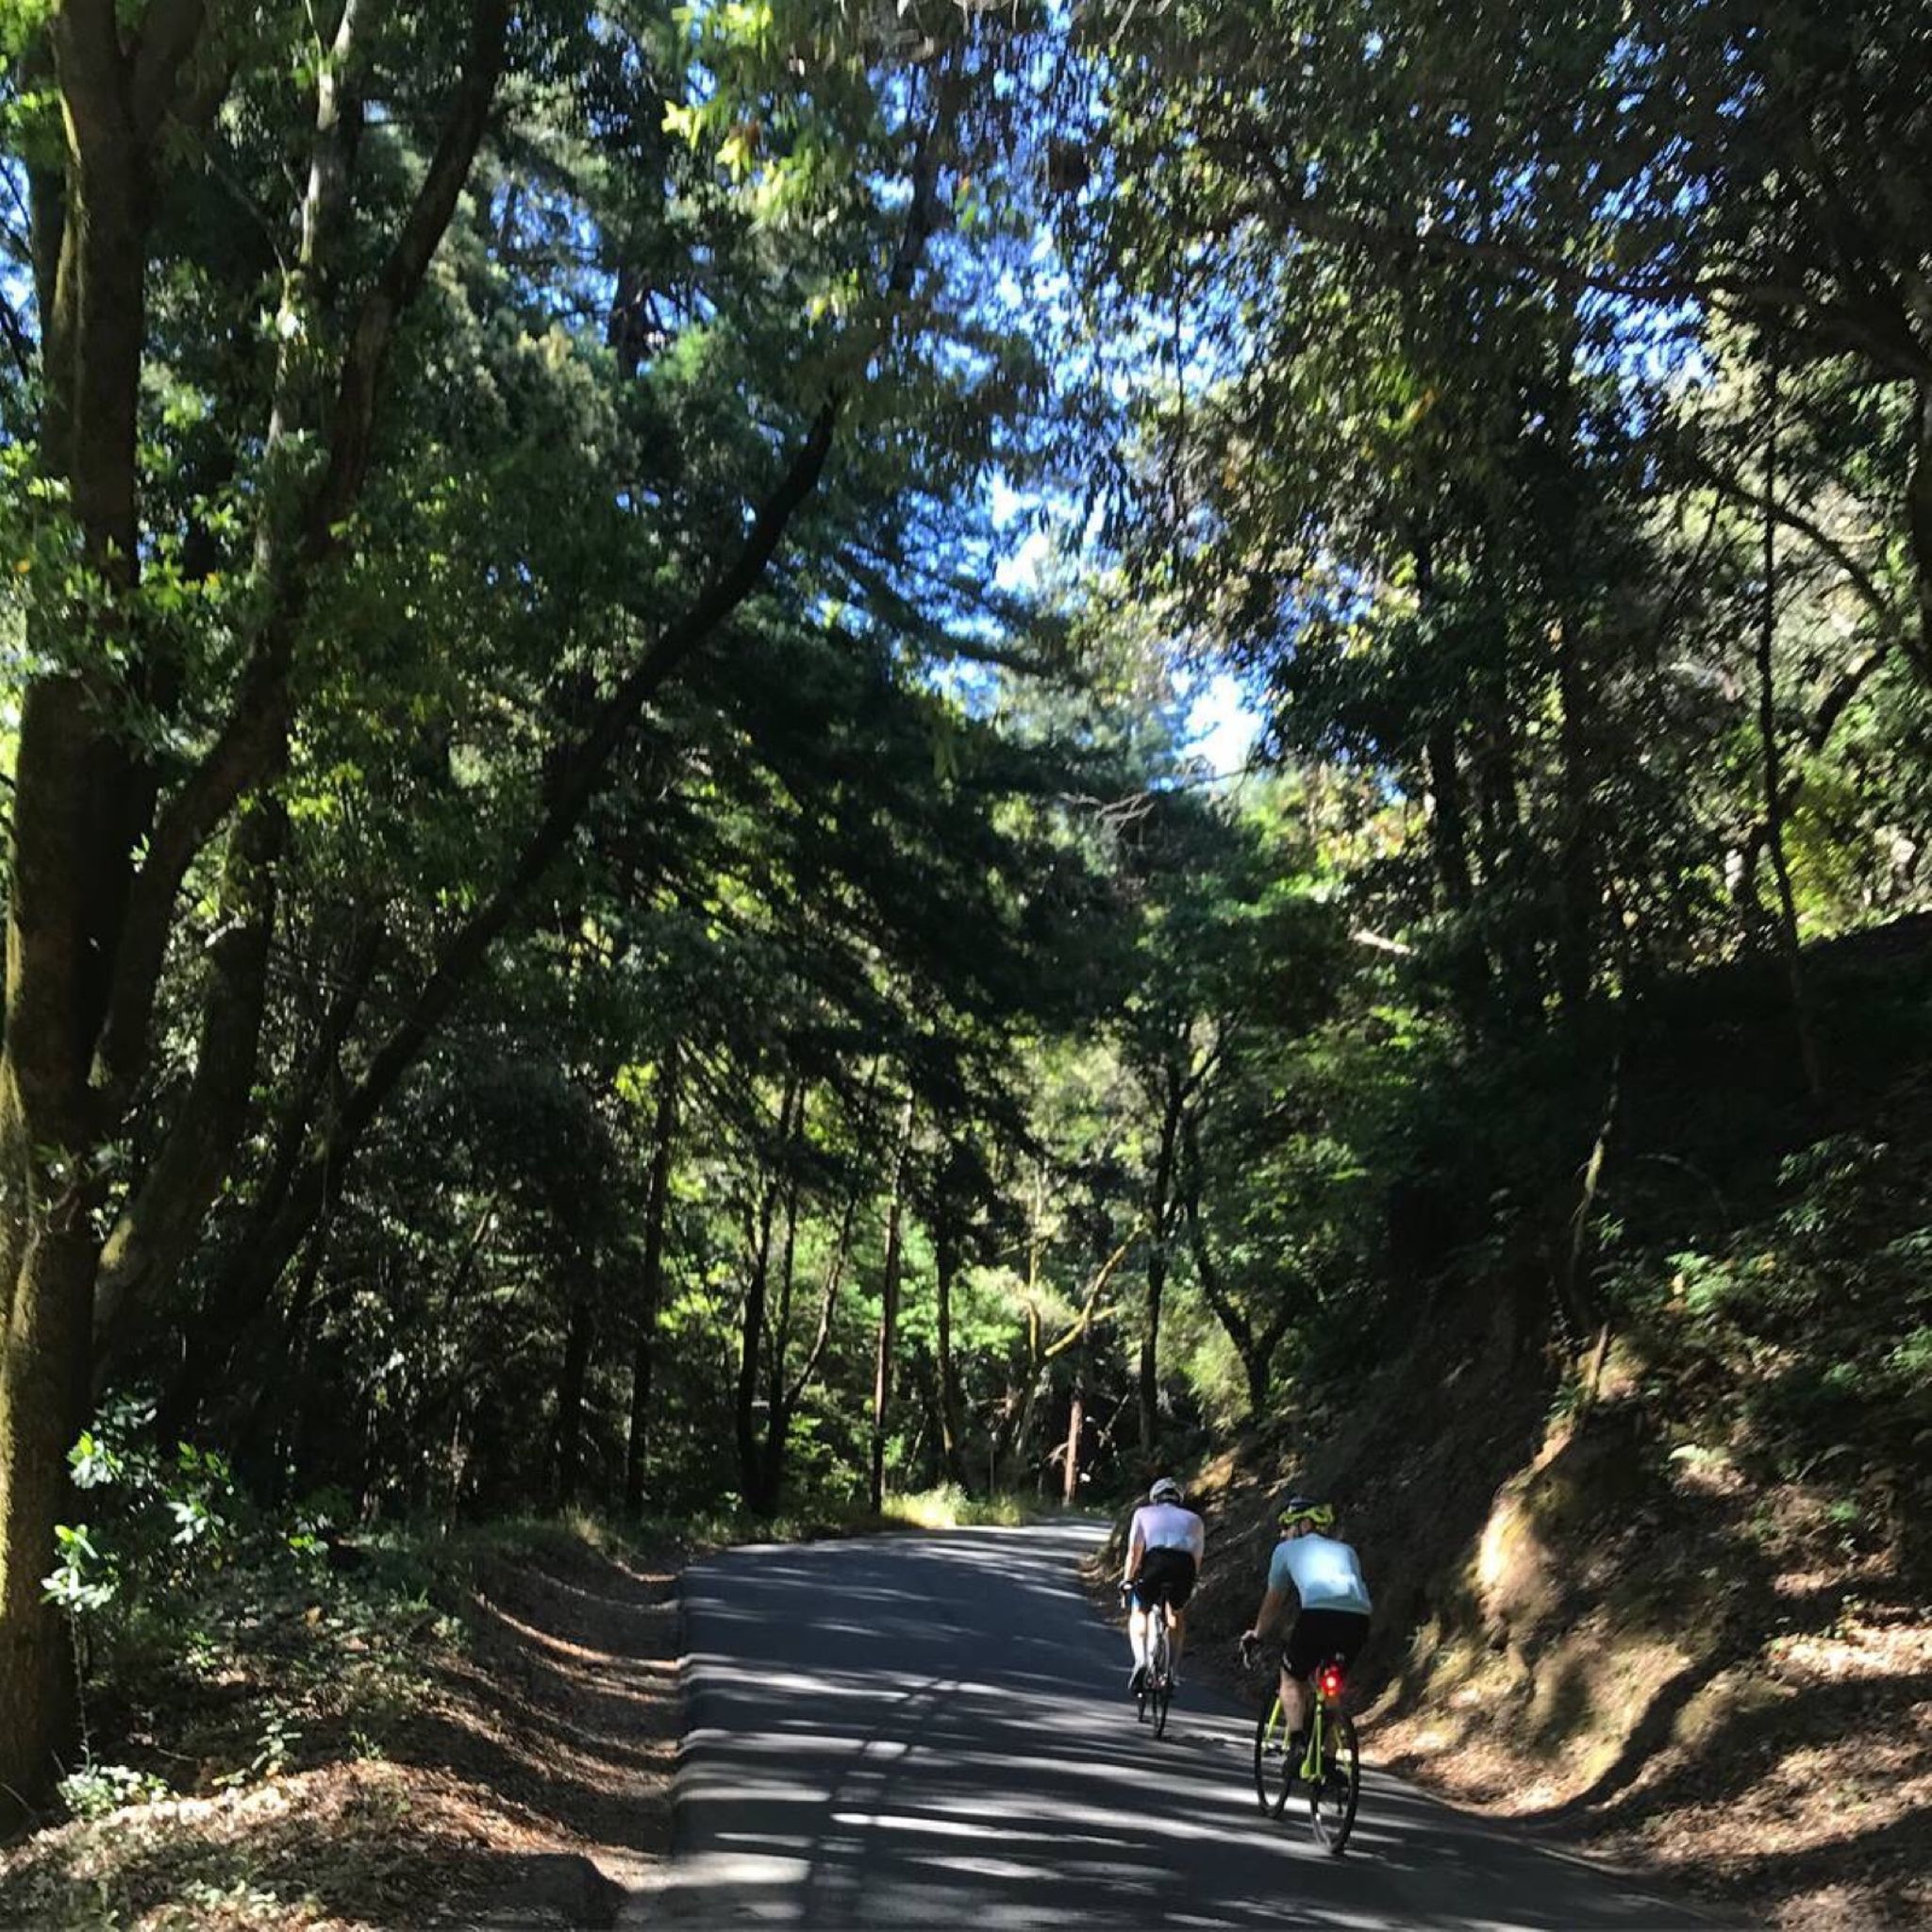 Two cyclists about to ascend up Old La Honda road near Woodside, California on a hot day in summer.